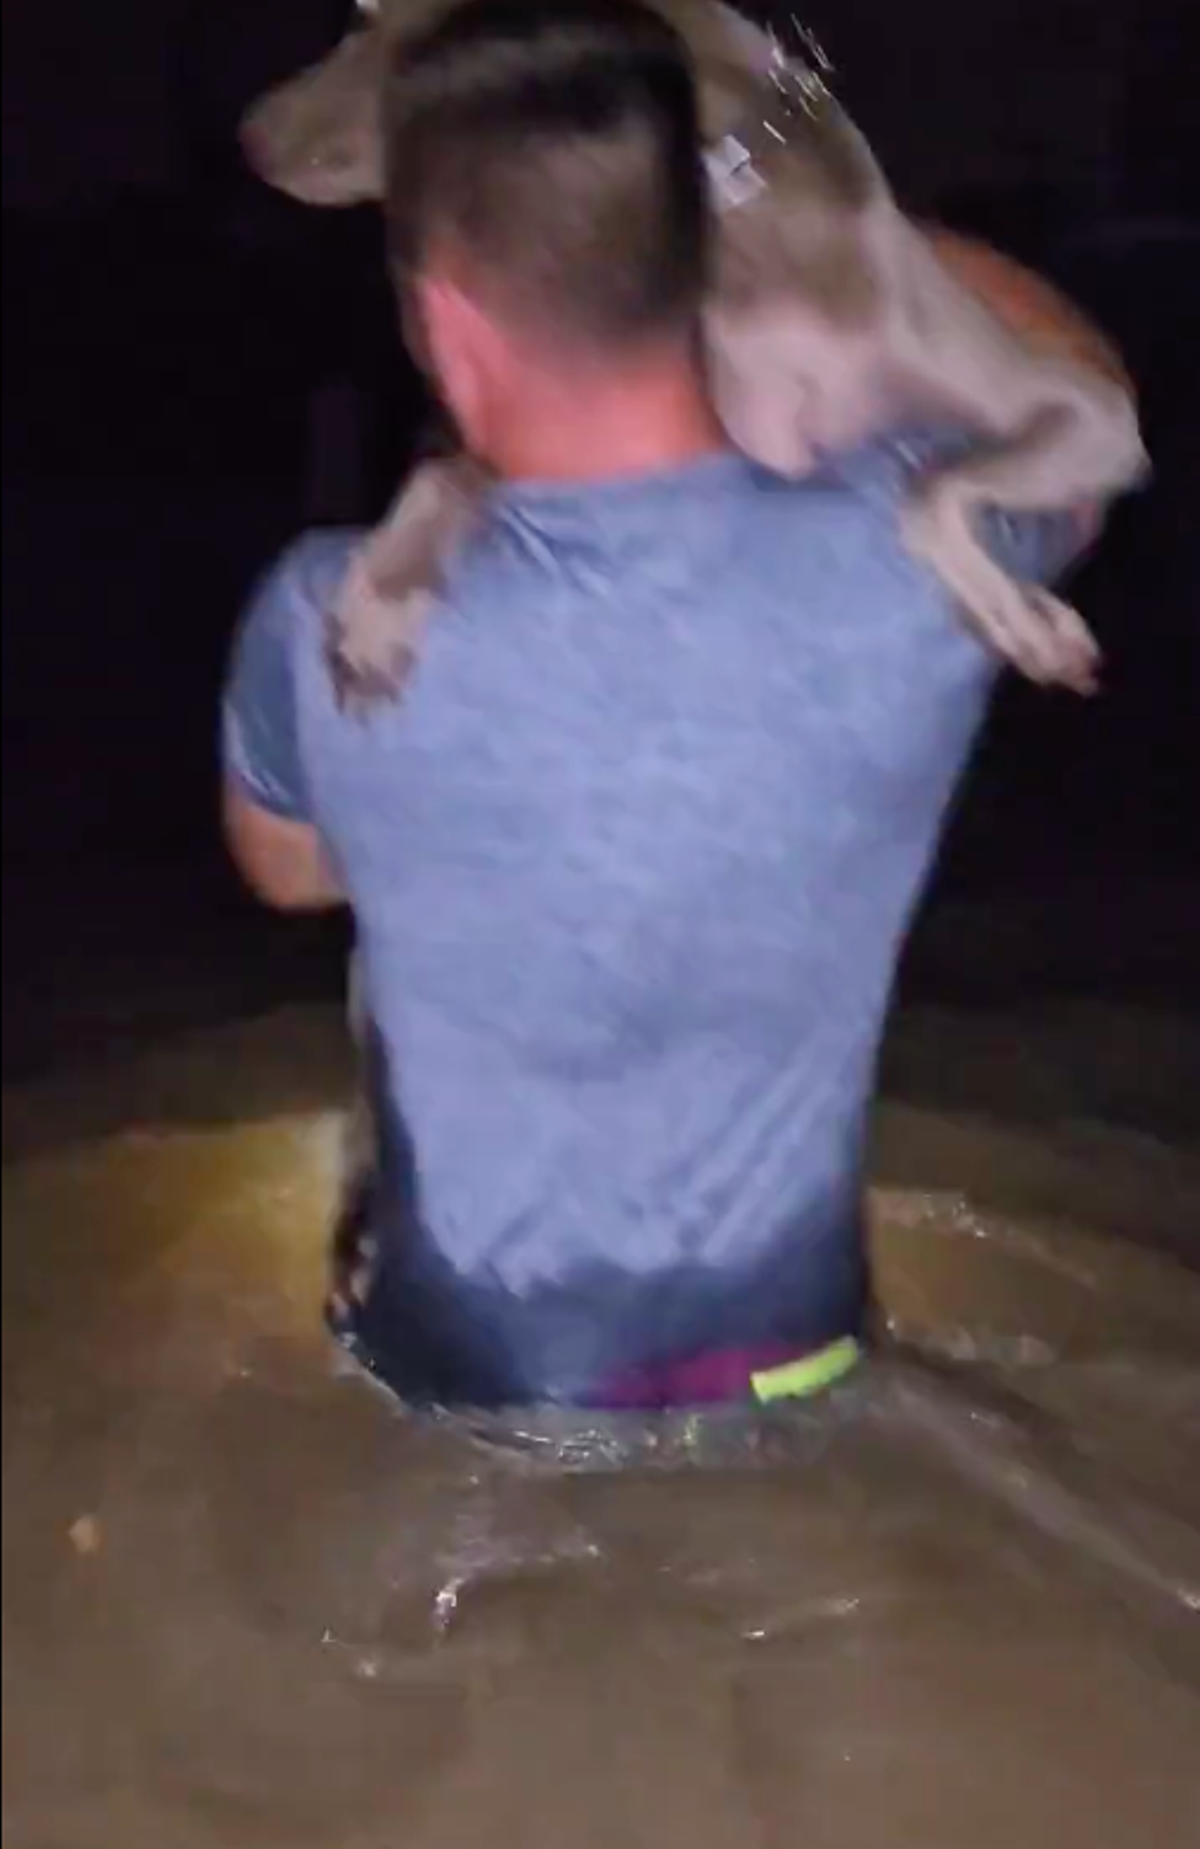 Key West resident carries dog through floodwaters in harrowing evacuation video | Florida News | Orlando